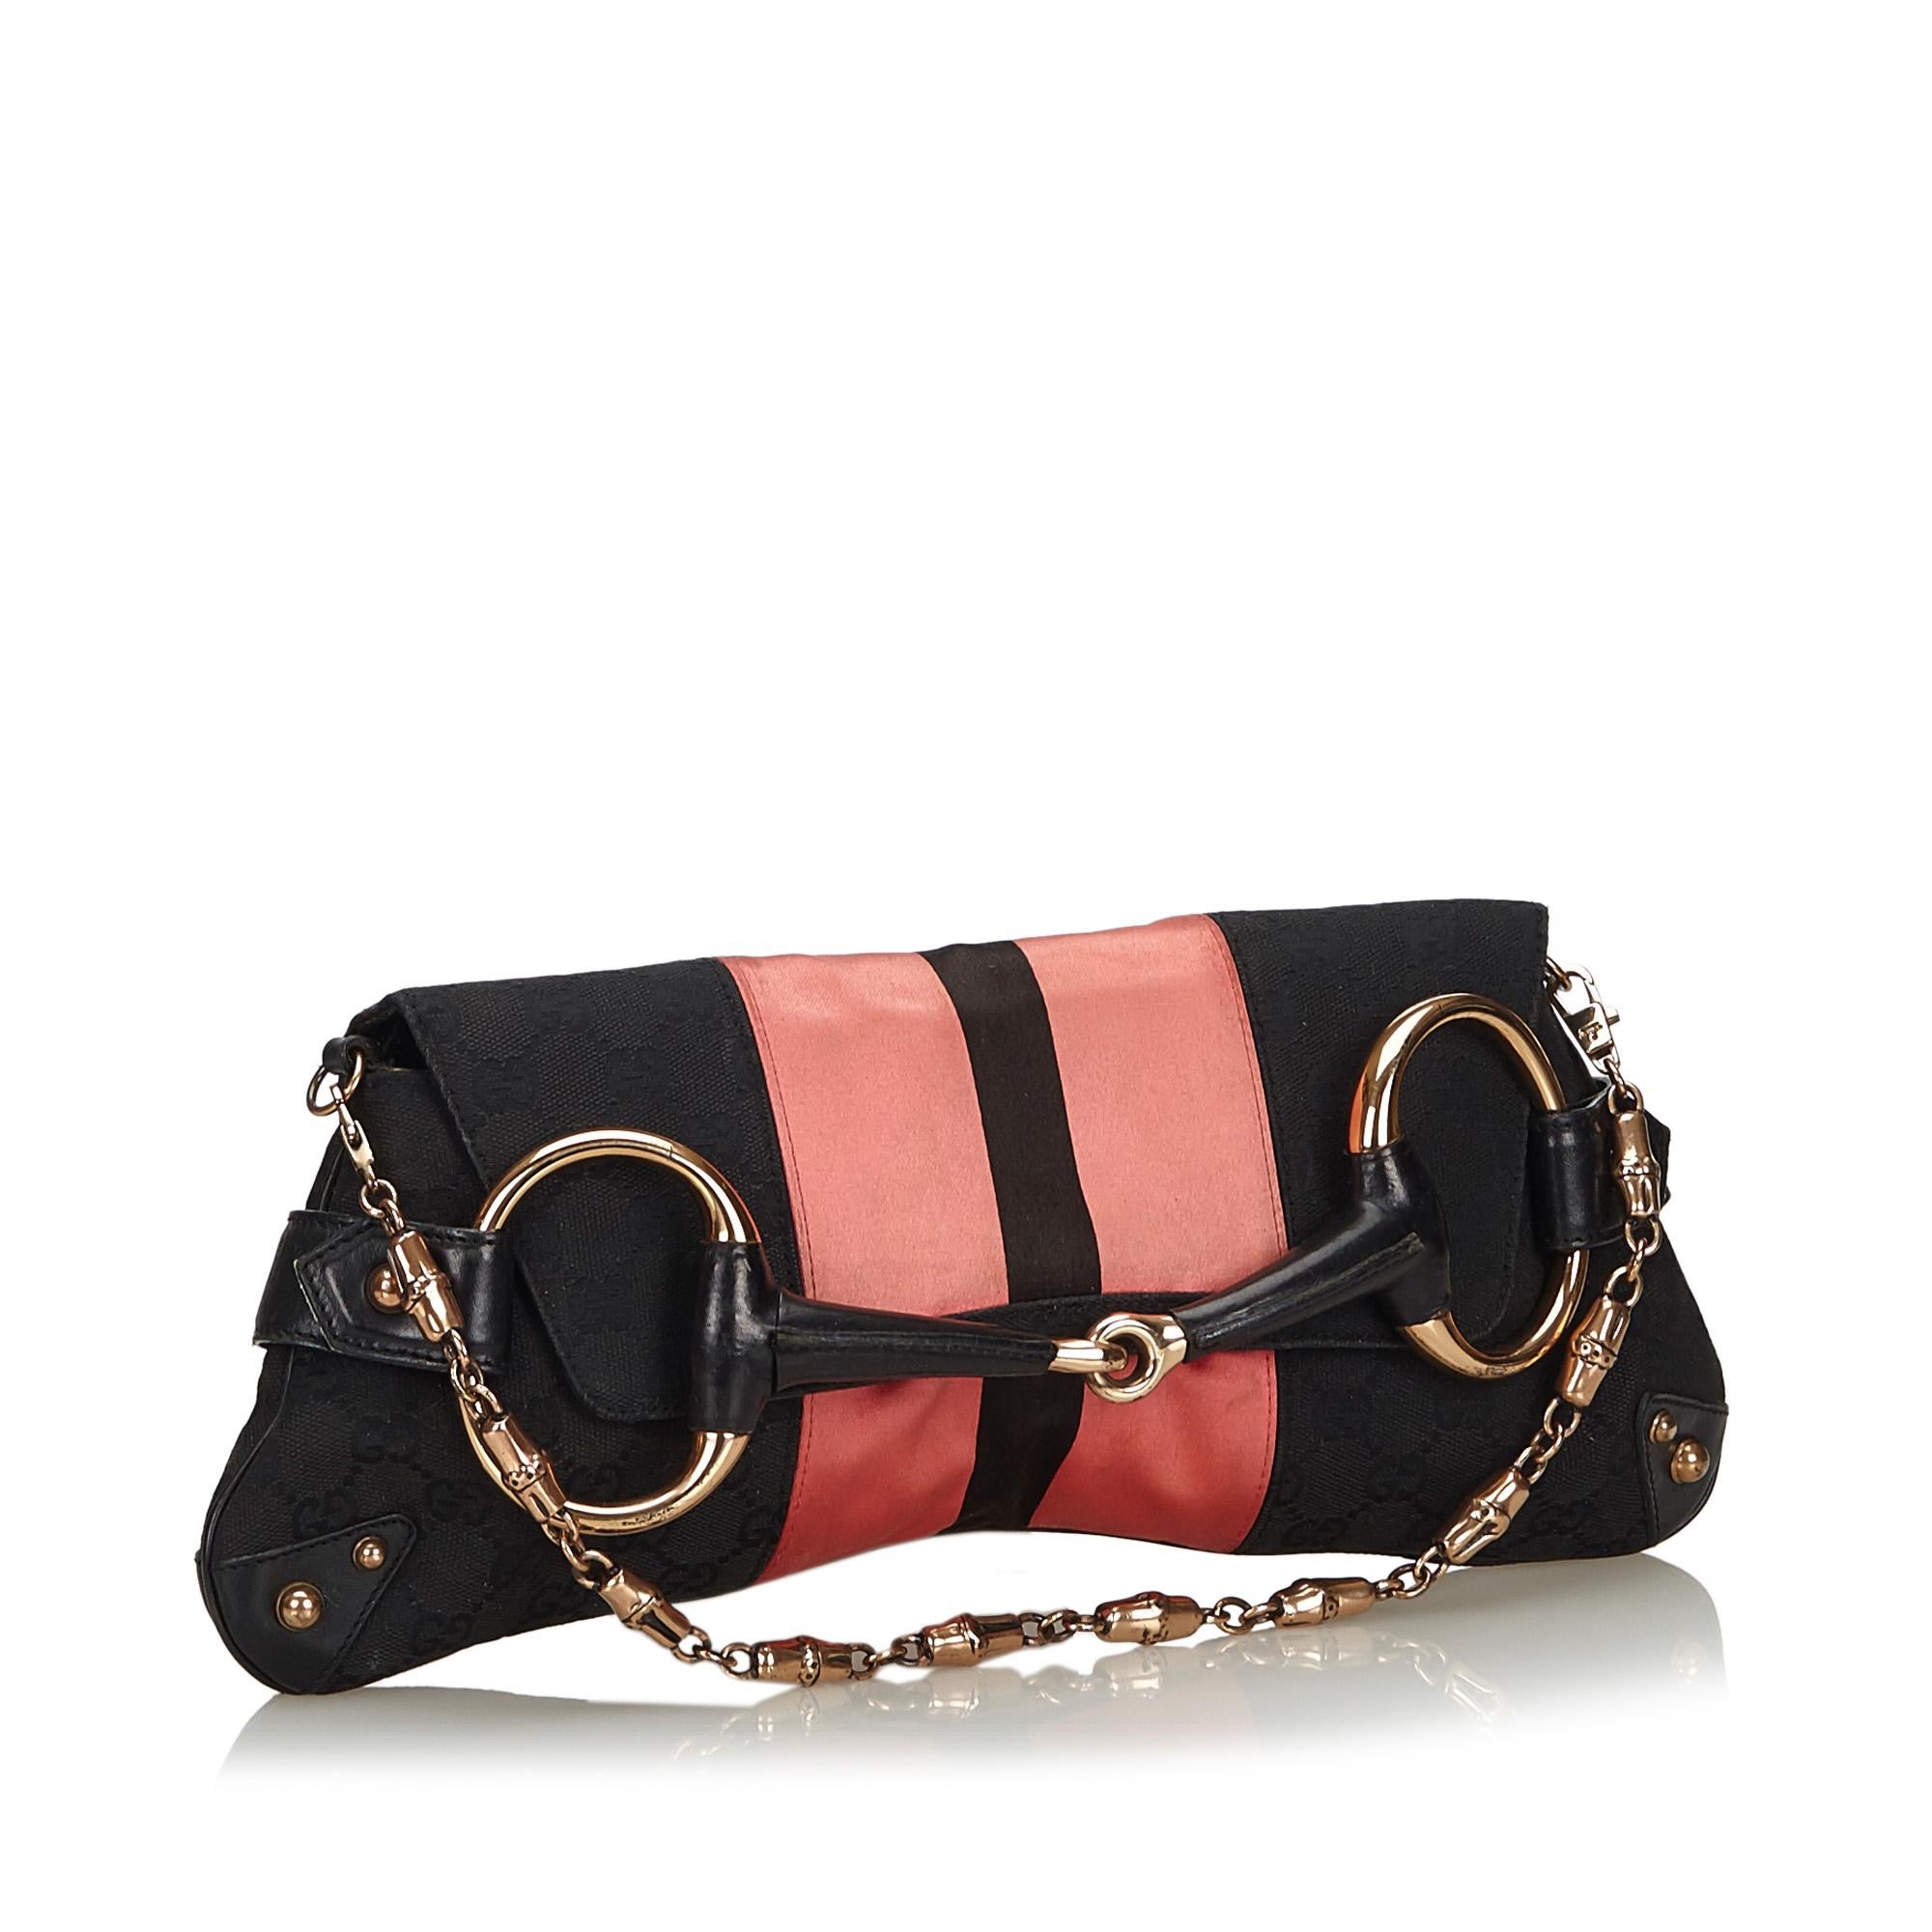 Gucci GG Canvas Horsebit Chain Baguette

This baguette features a canvas body with leather trim, metal bamboo straps, a front flap with horsebit details, and an interior slip pocket. 

Approx. 

Length: 16 cm. 
Width: 36 cm. 
Depth: 1 cm. 
Drop: 17